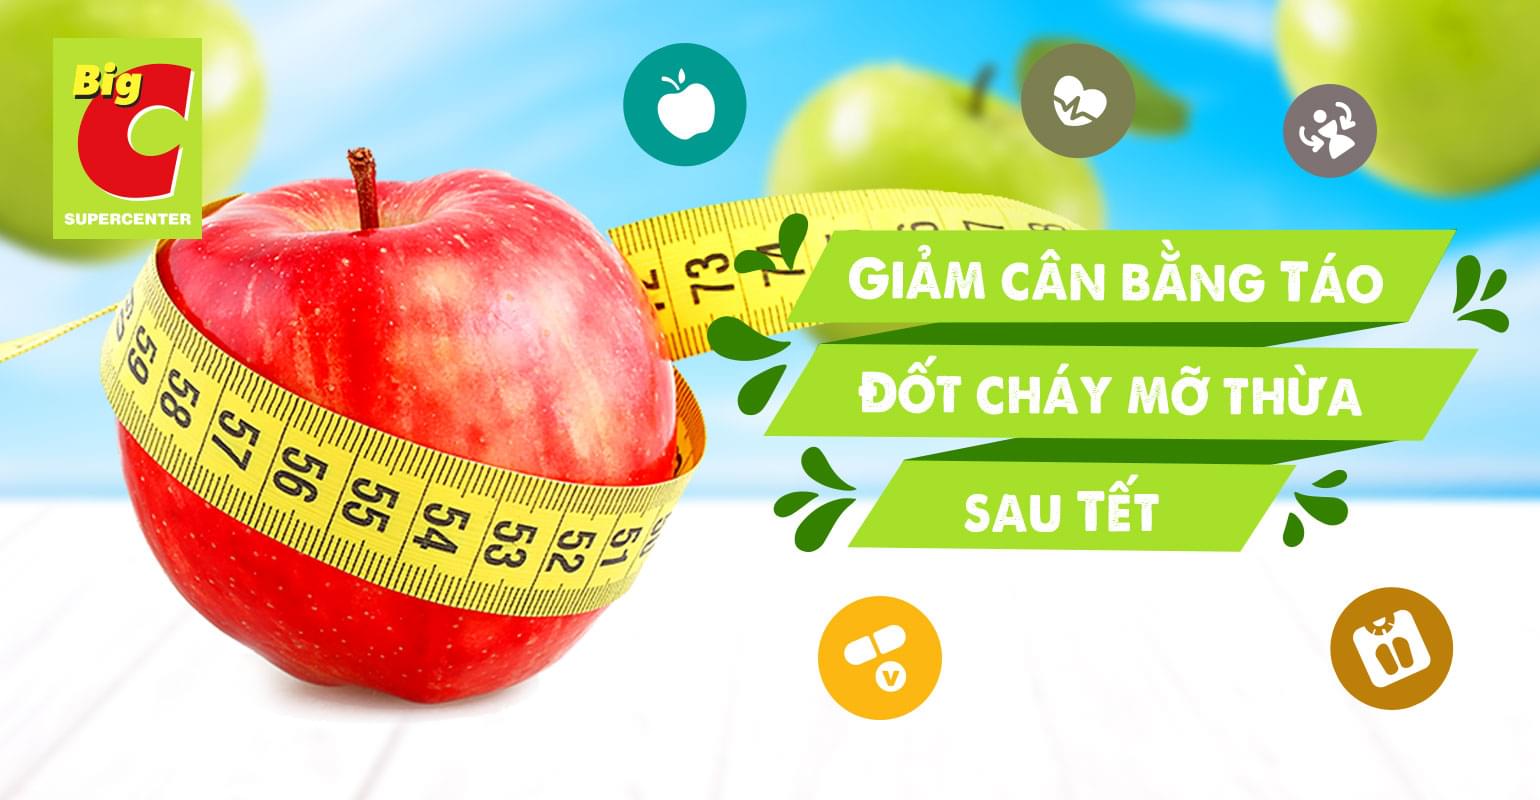 Lose weight after Tet: an apple a day cuts the belly fat away